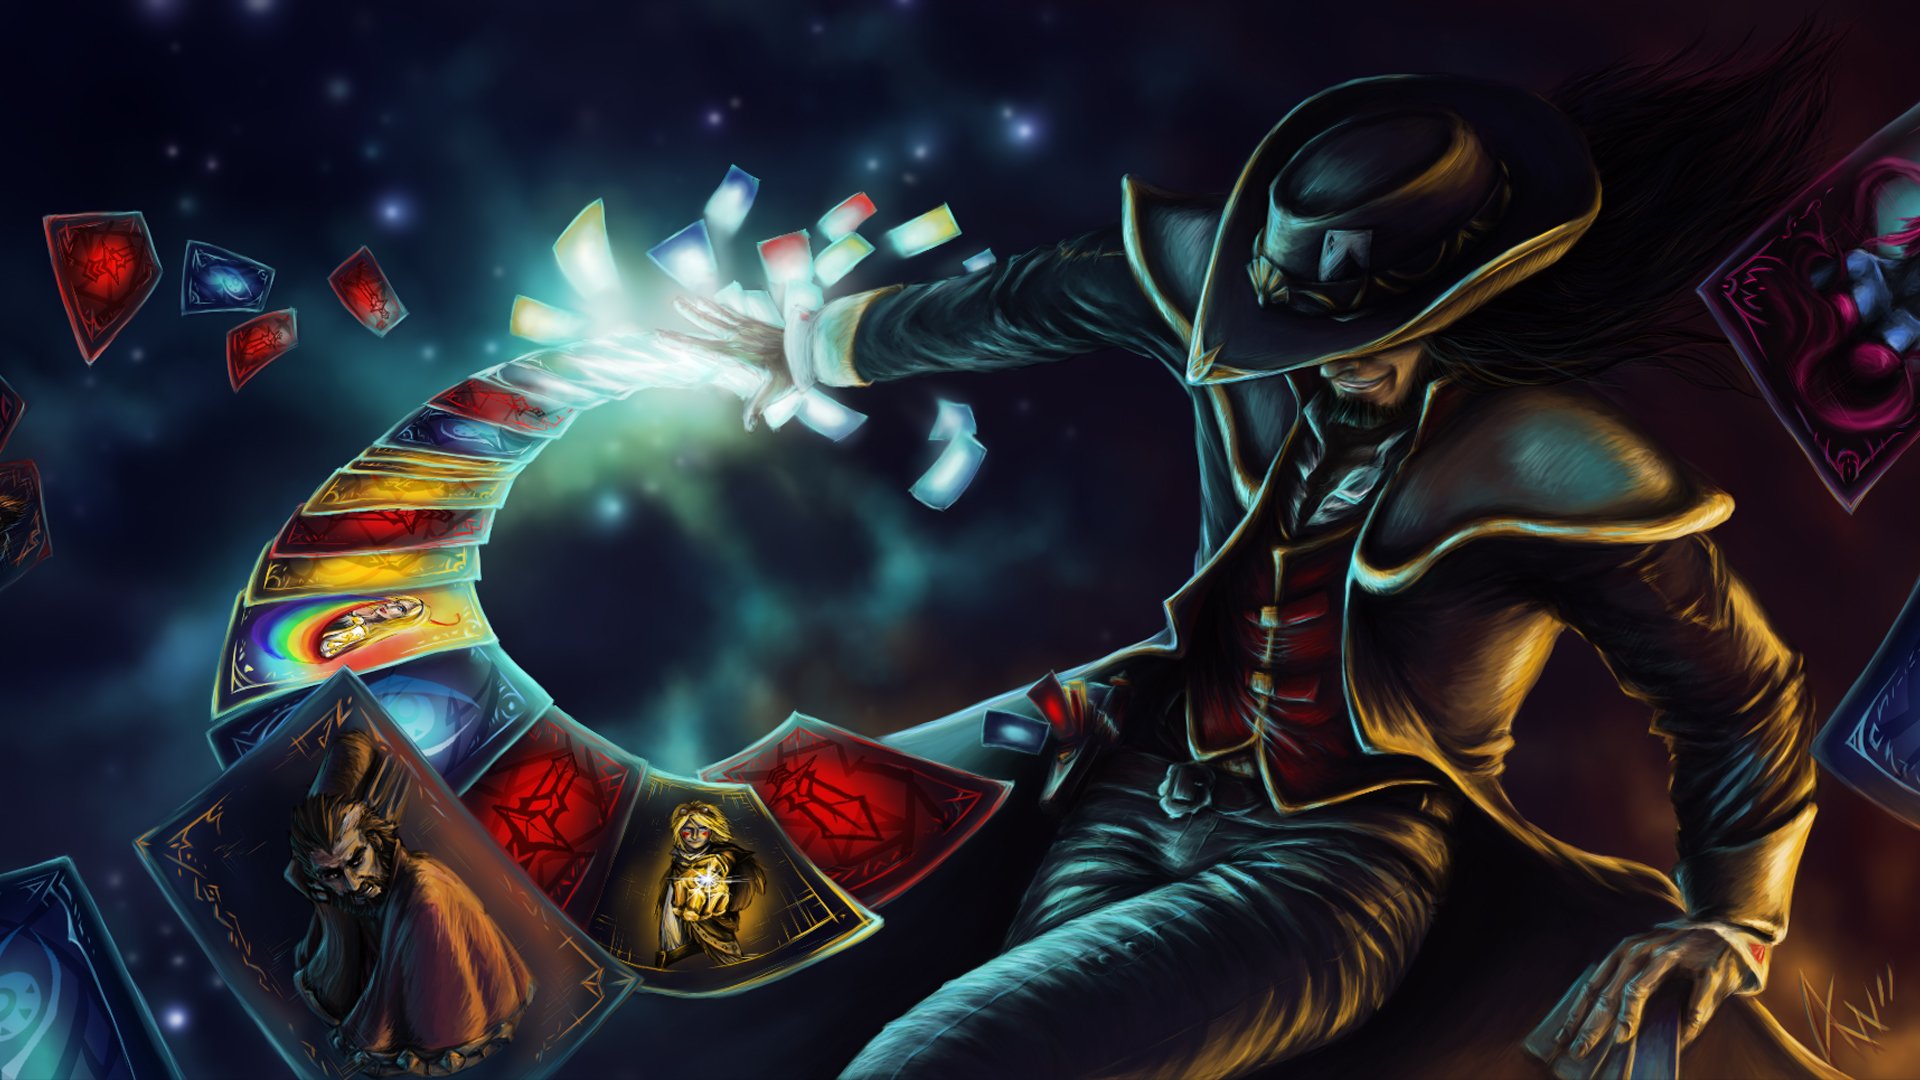 40+ Twisted Fate (League Of Legends) HD Wallpapers and Backgrounds.